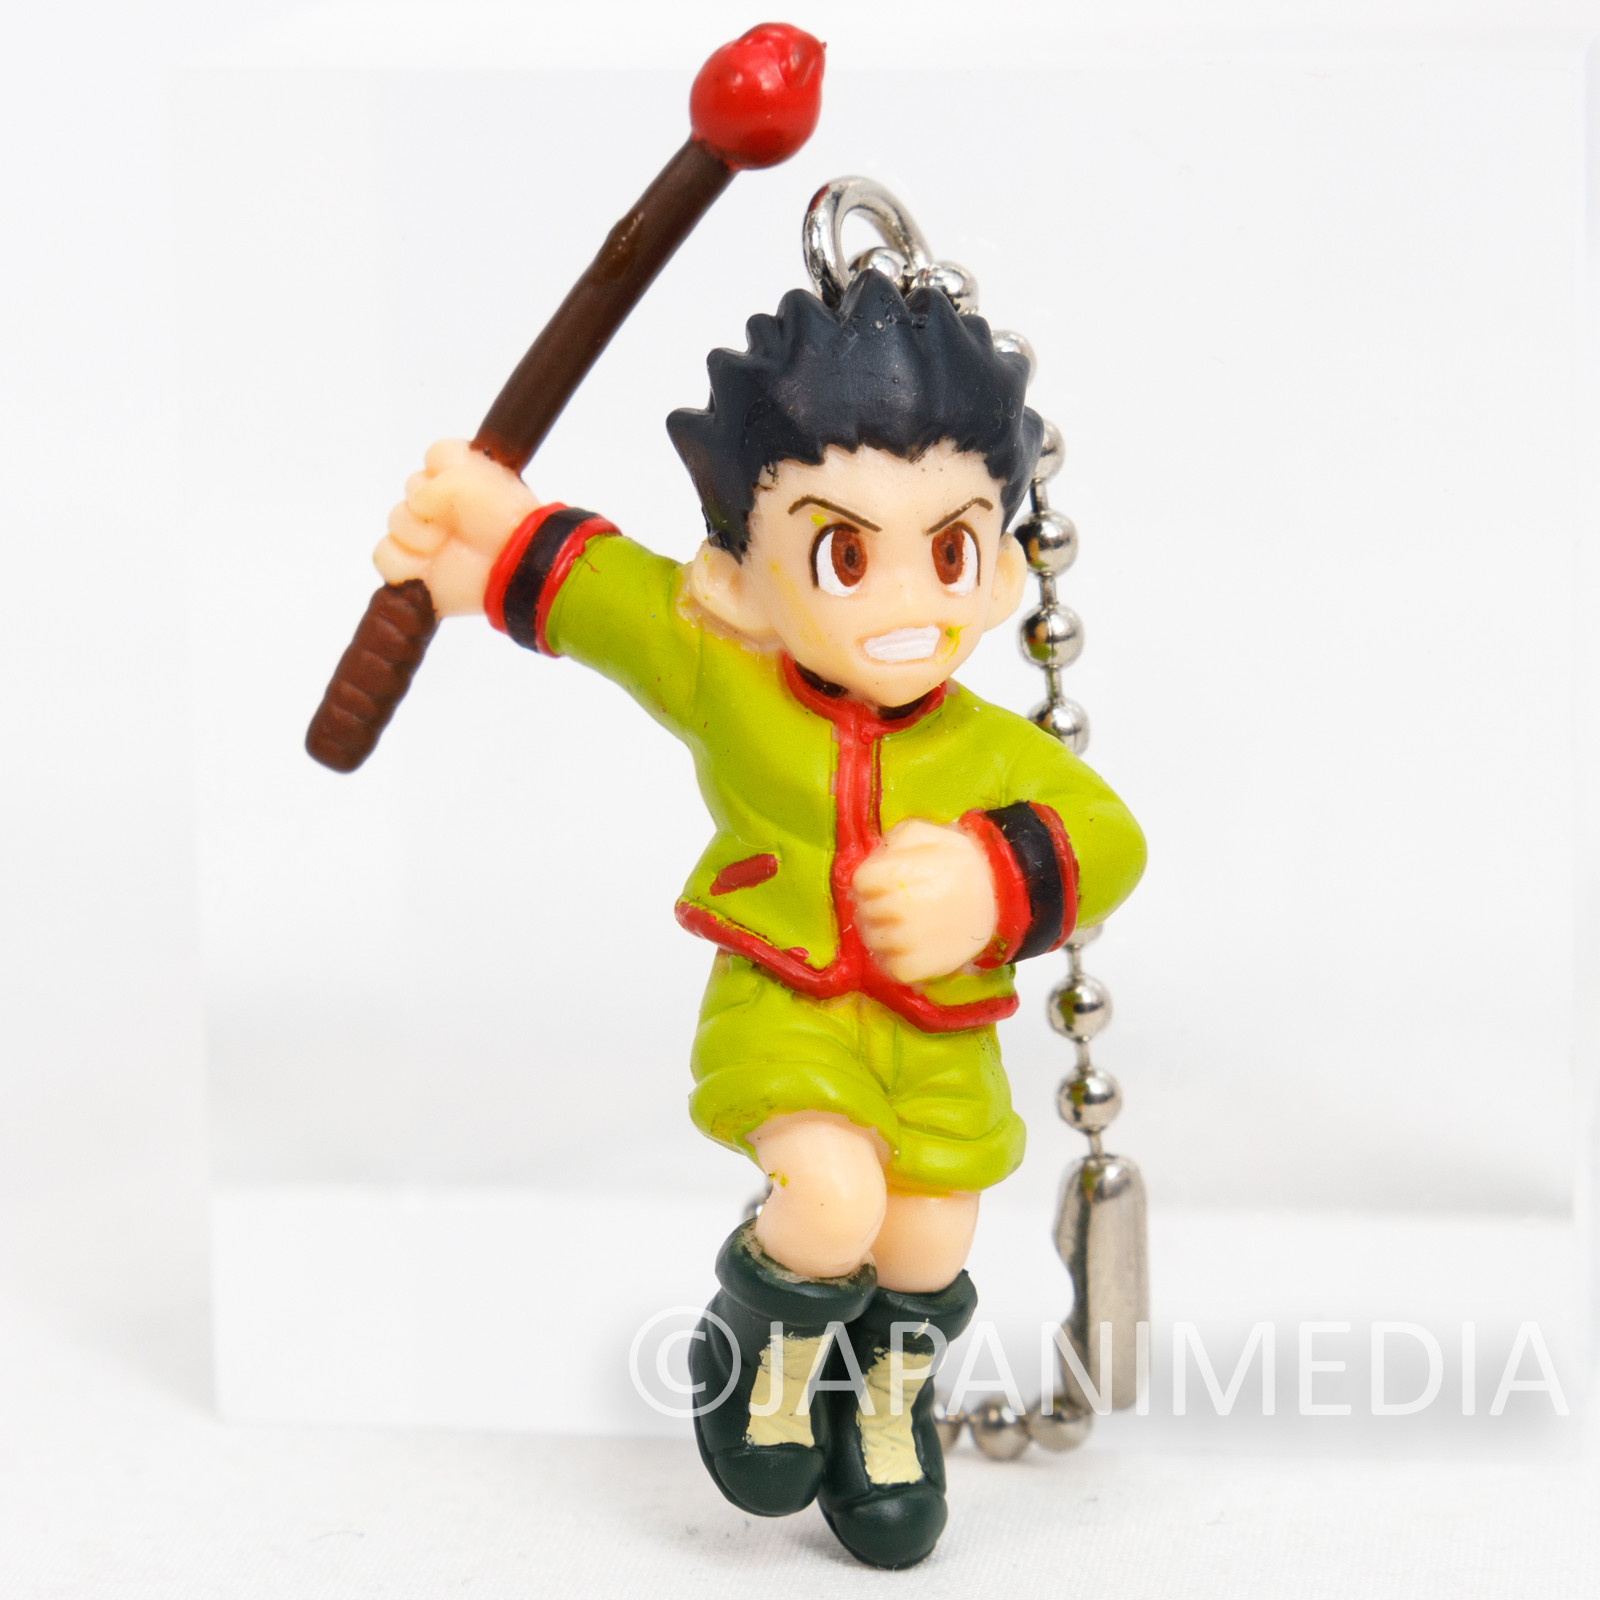 Hunter x Hunter Gon Freecss Figure Statue Doll New in Box 11 inches